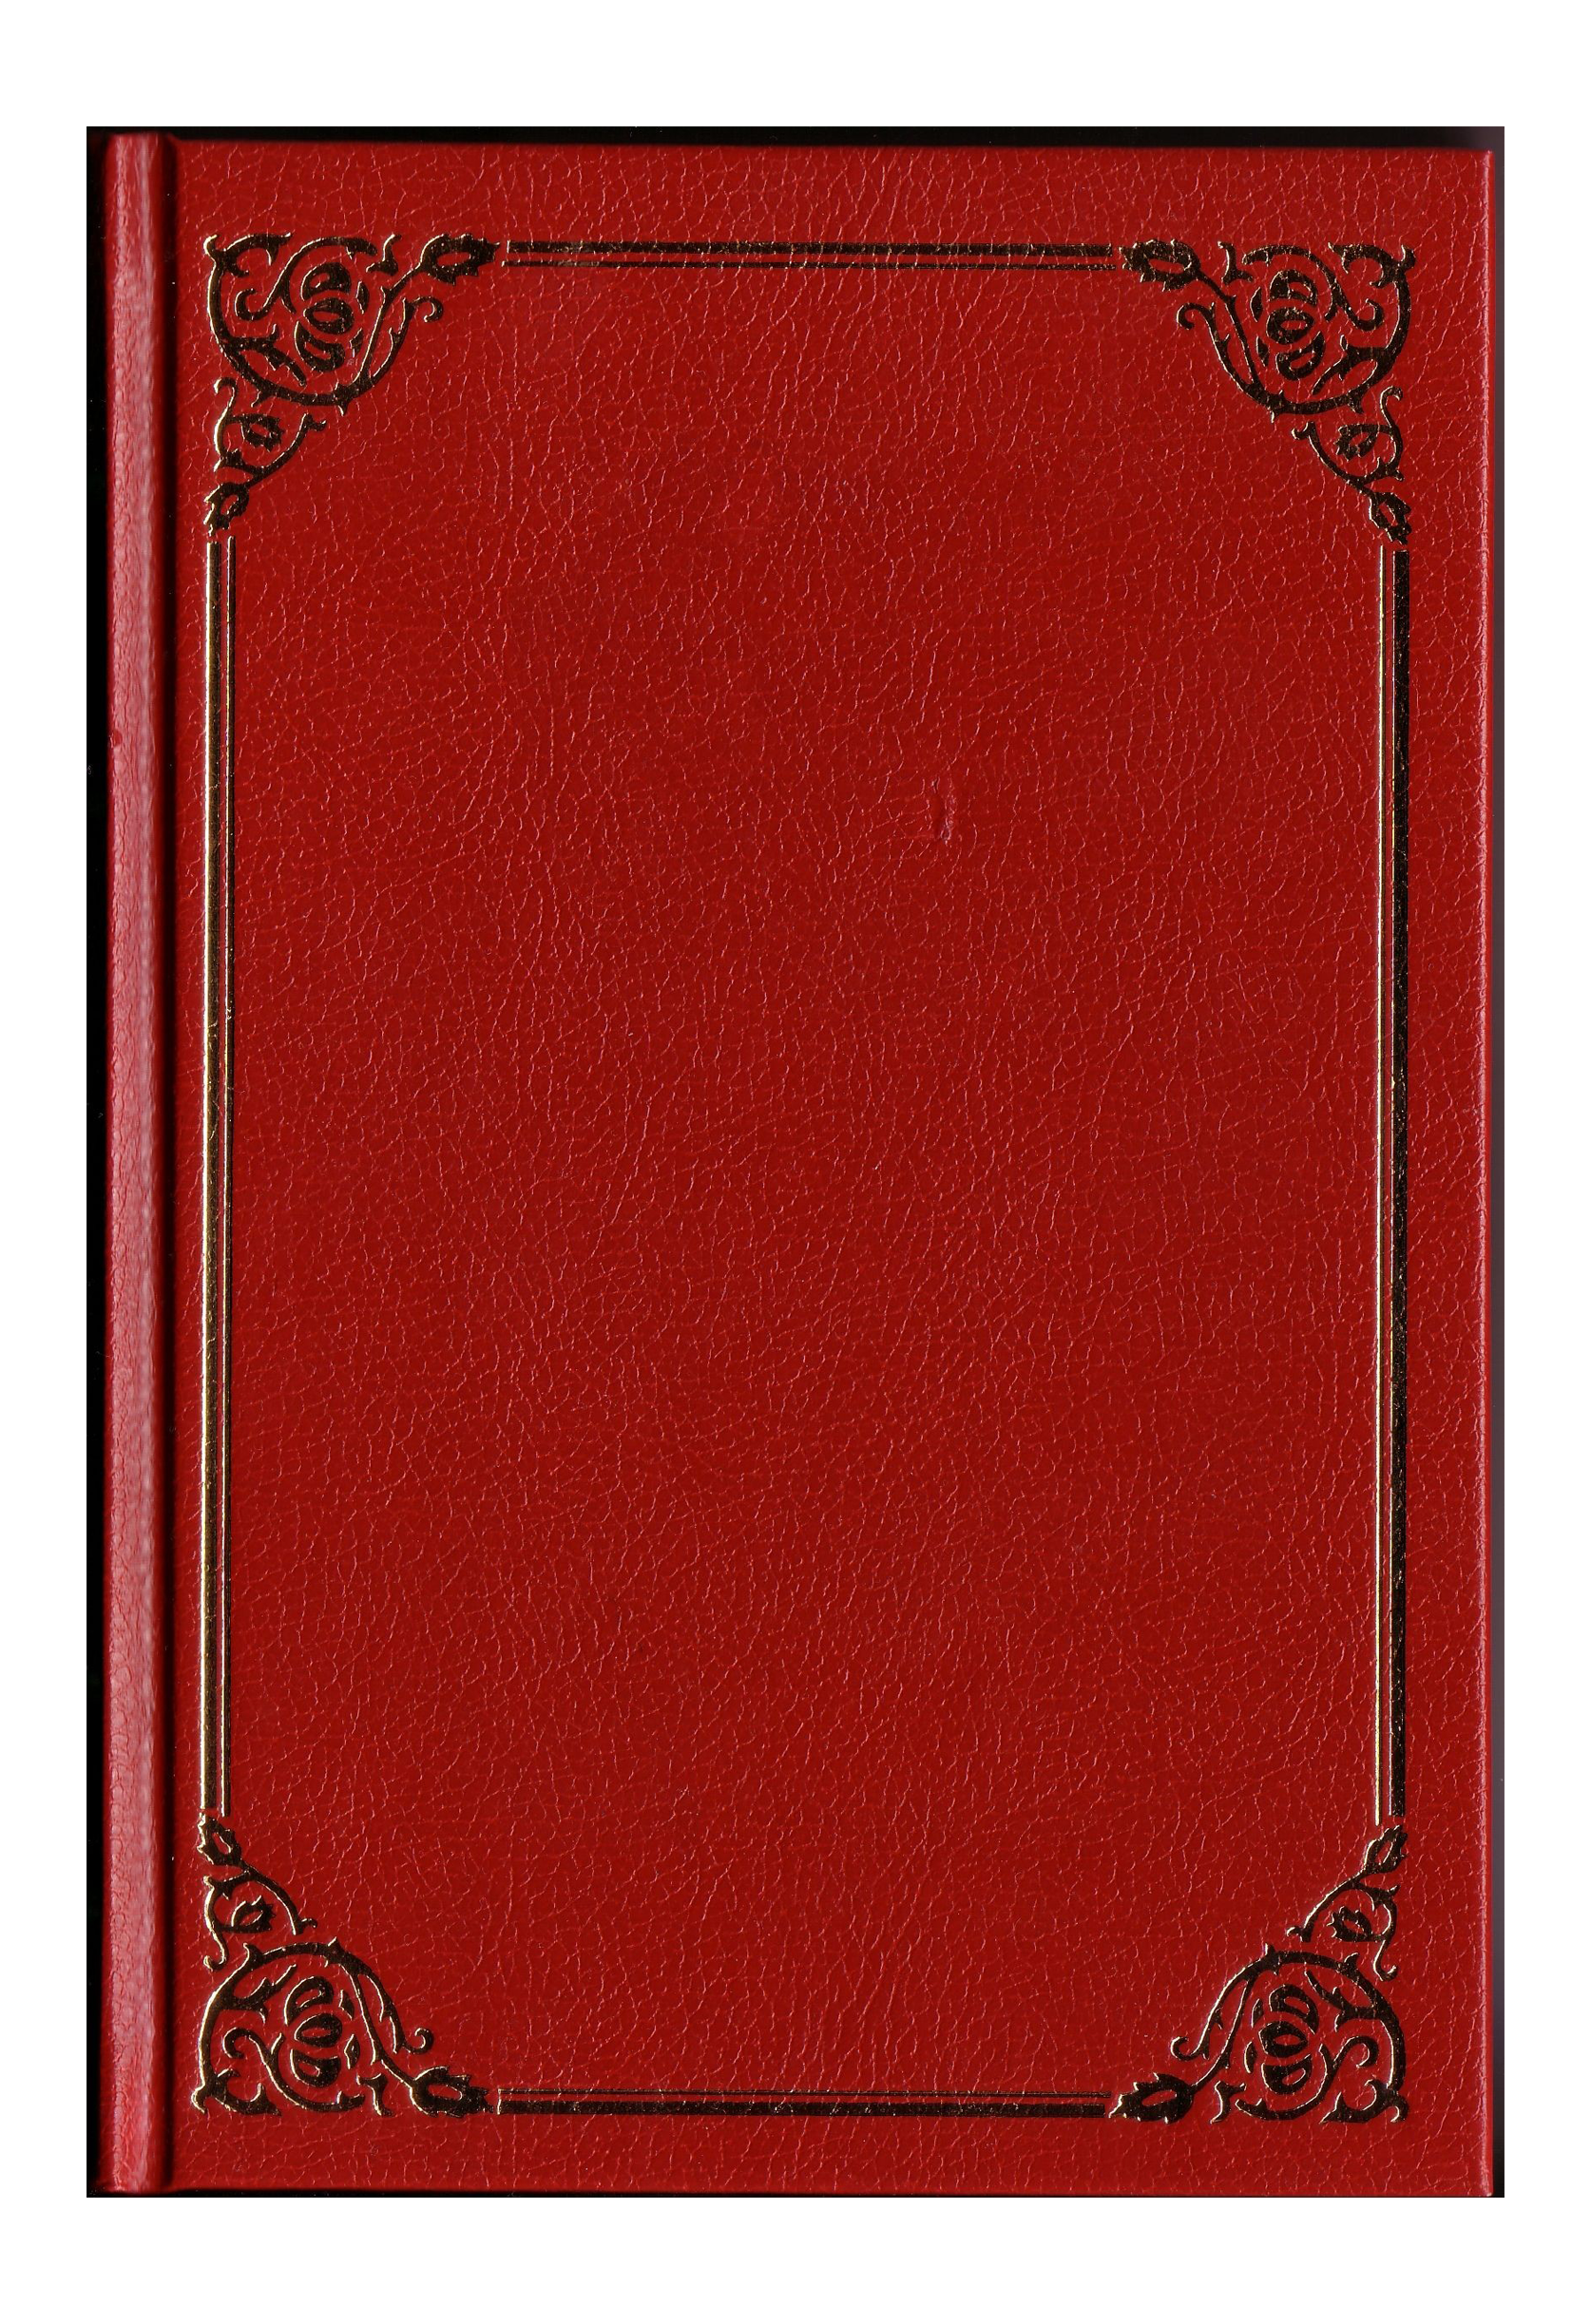 A Red Leather Book With A Black Background